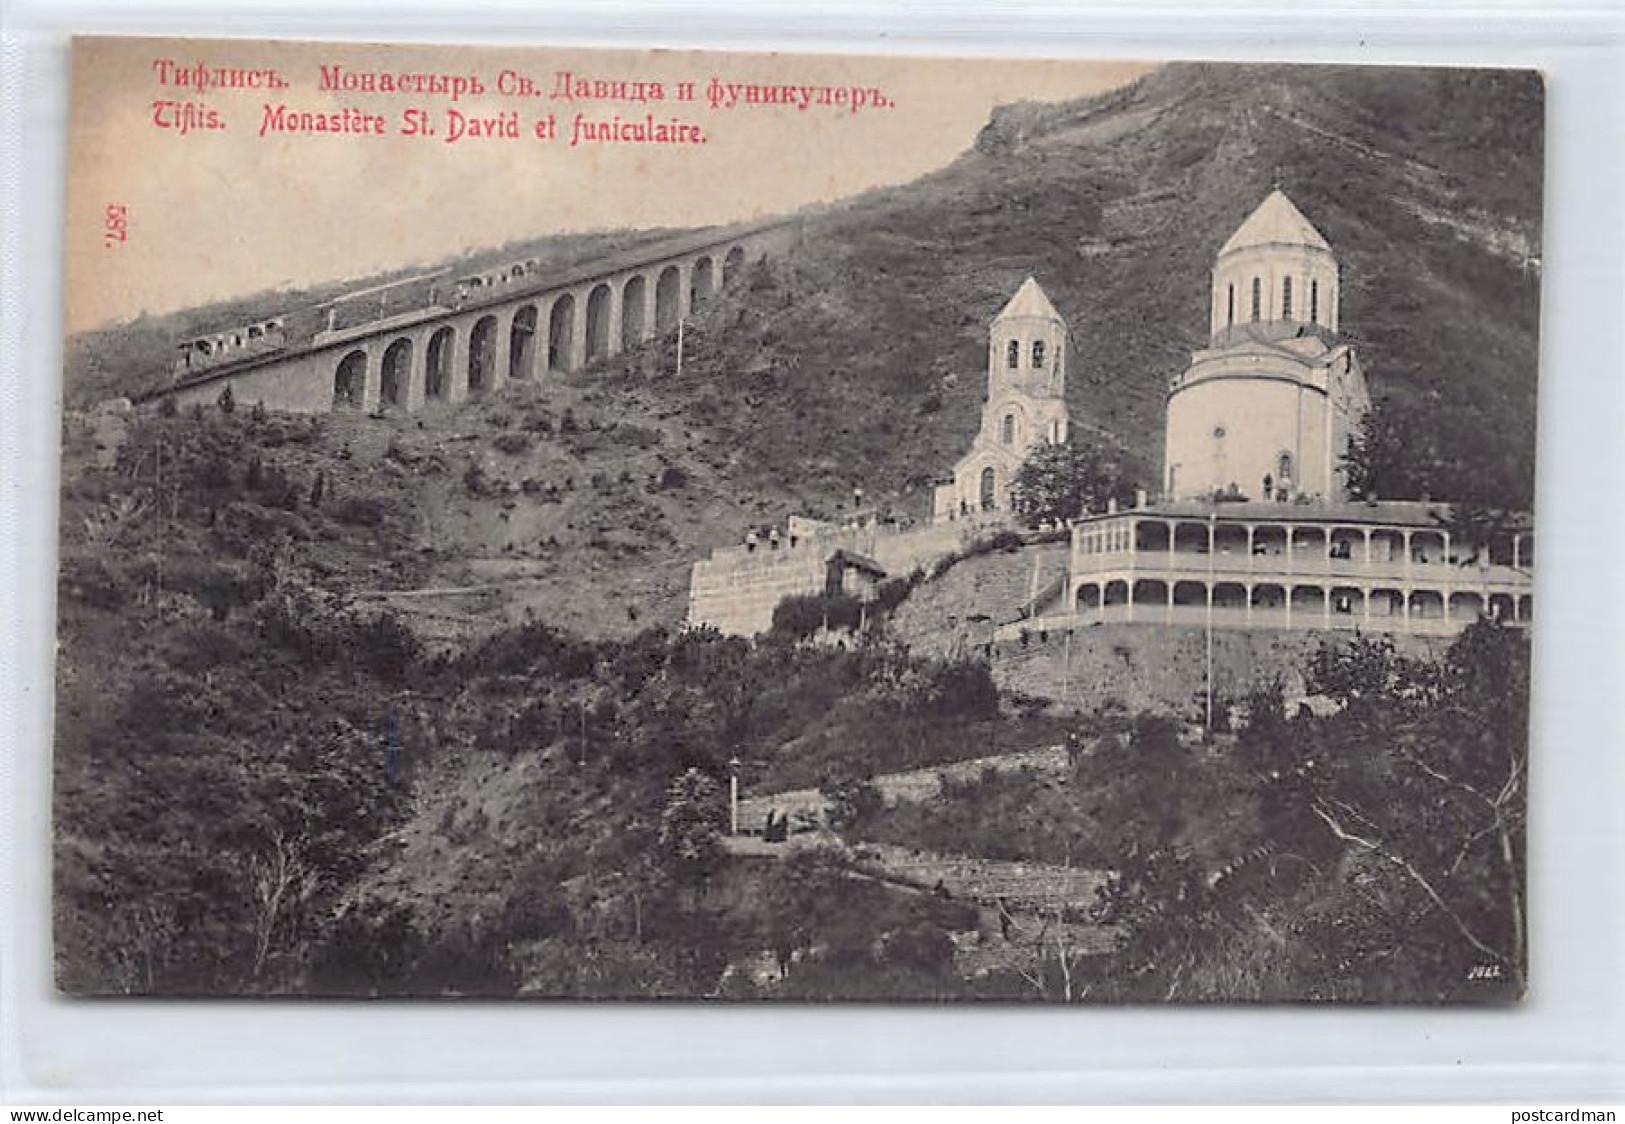 Georgia - TBILISI - St. David Monastery And The Funicular - Publ. Unknown 587 - Géorgie